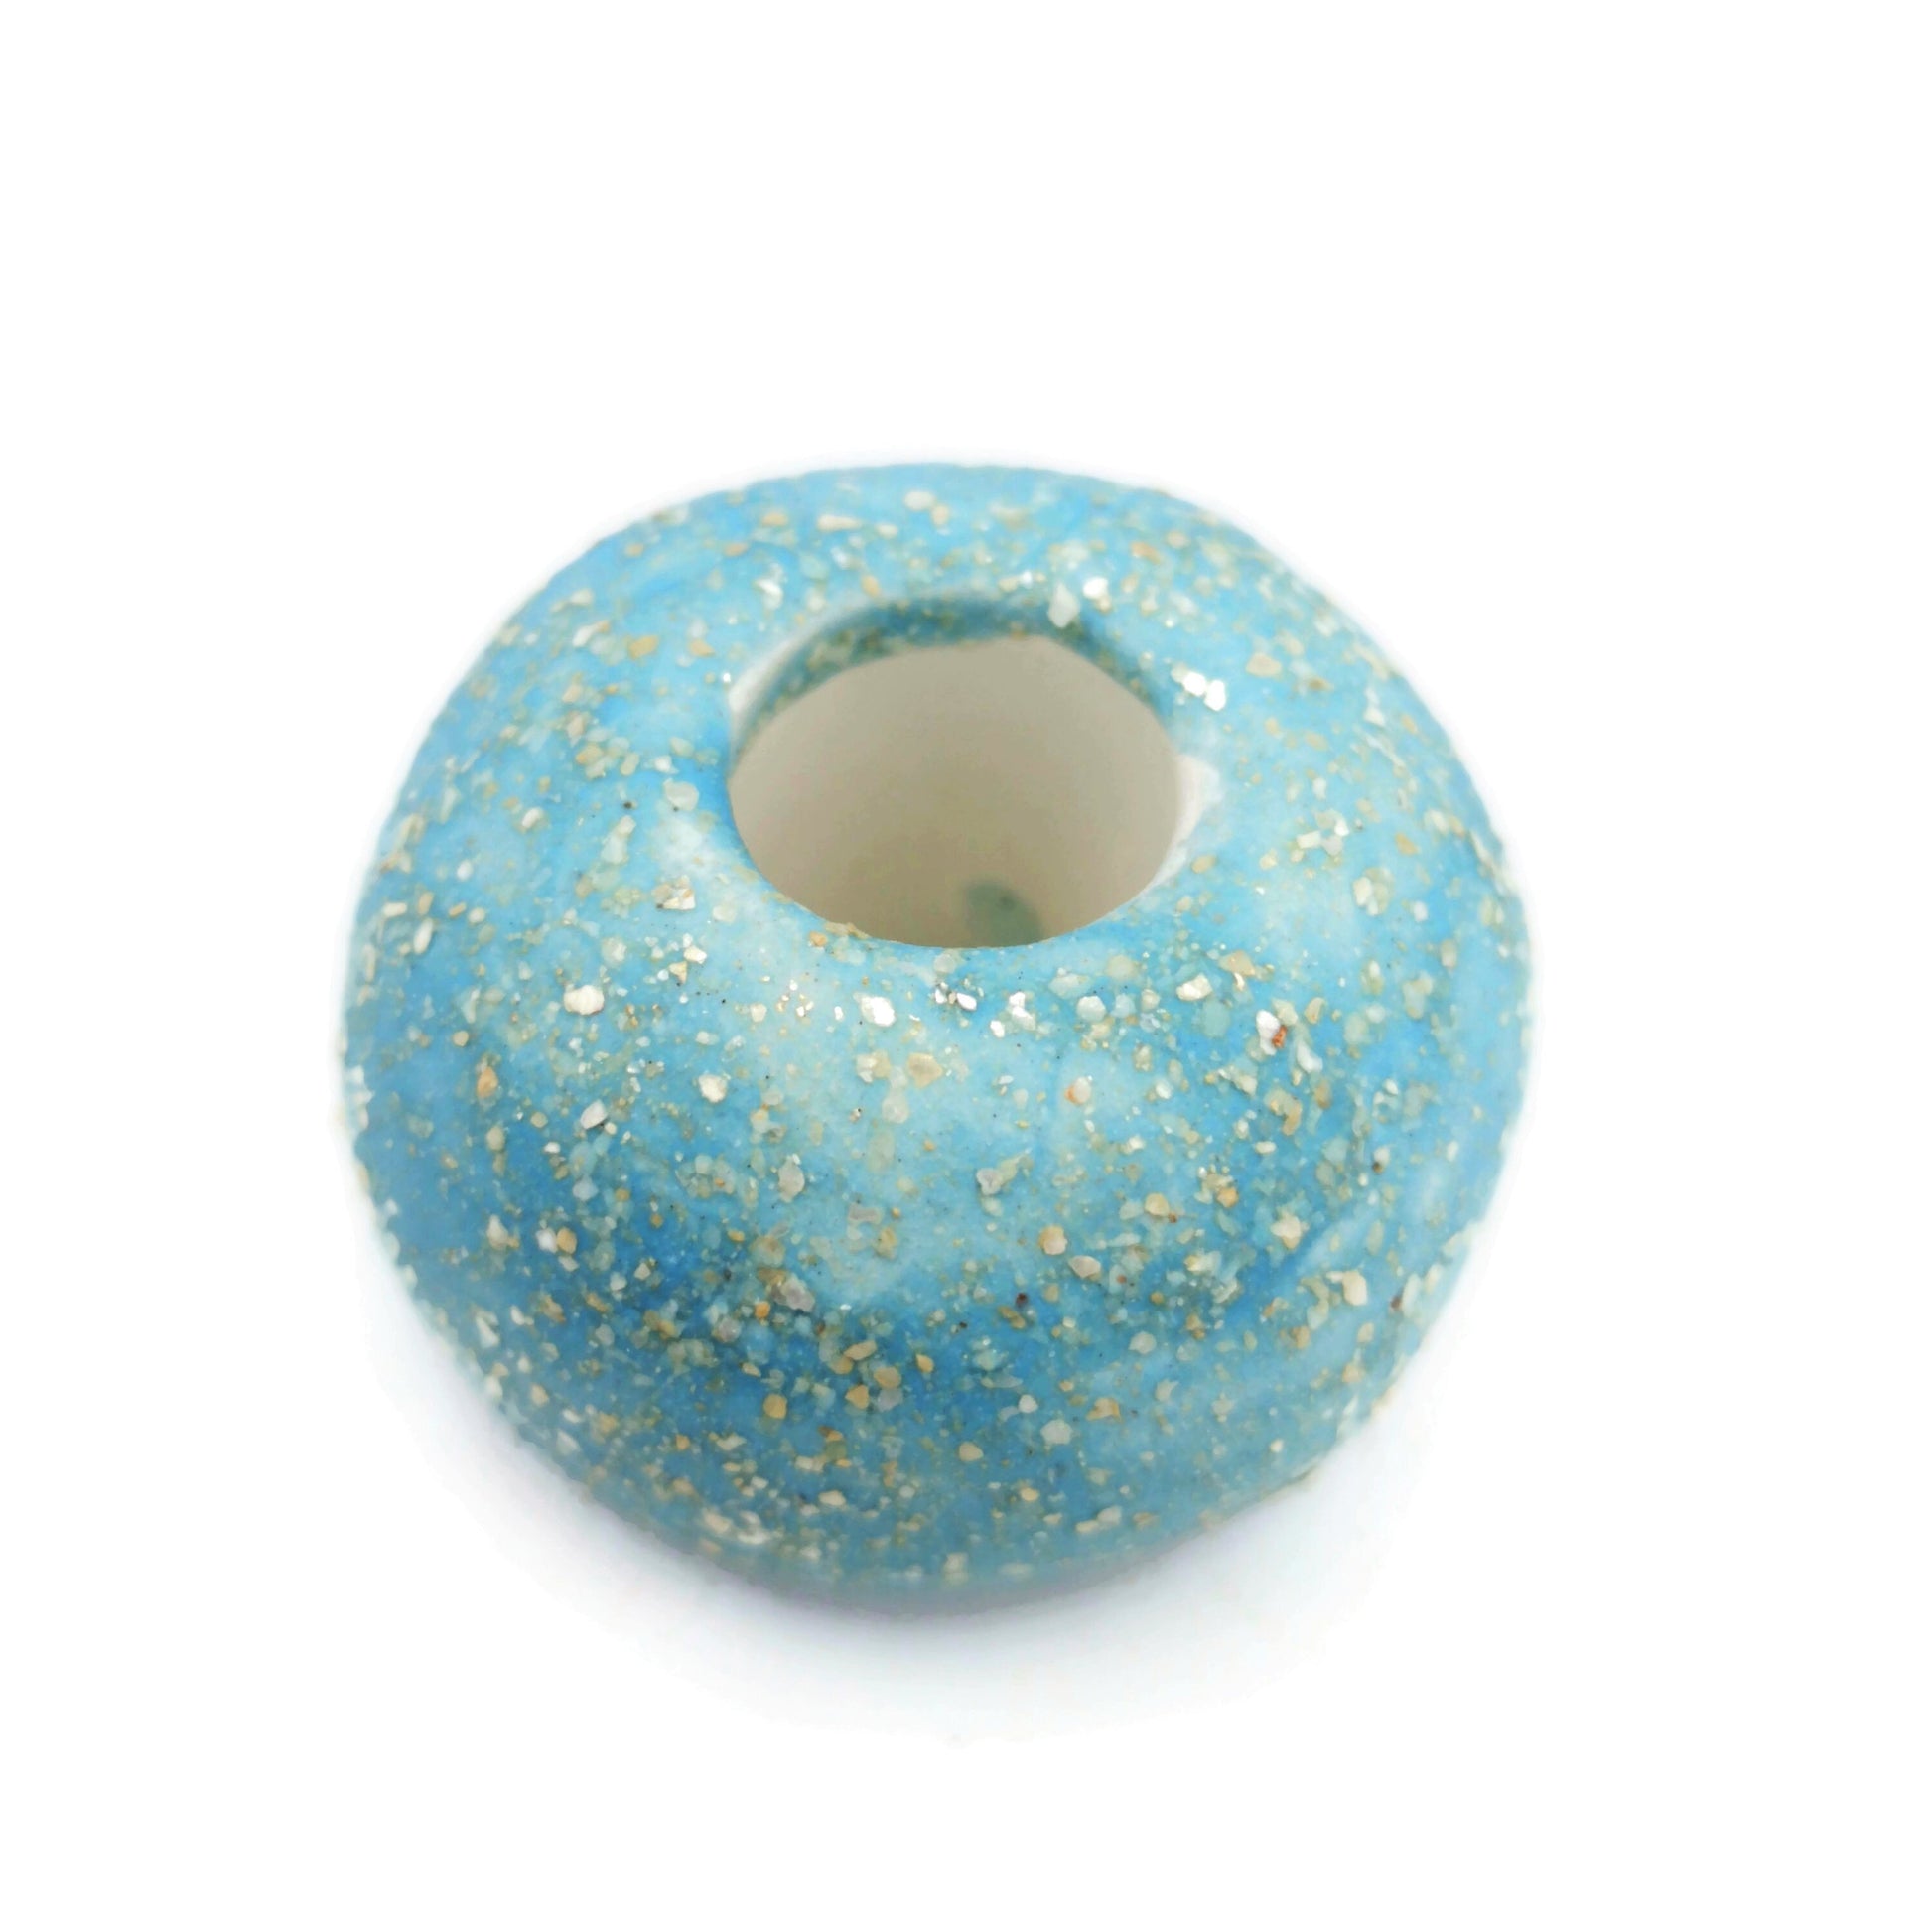 unique beads for jewelry making, handmade ceramic large macrame beads large hole, round sparkly beads for crafts, clay beads - Ceramica Ana Rafael